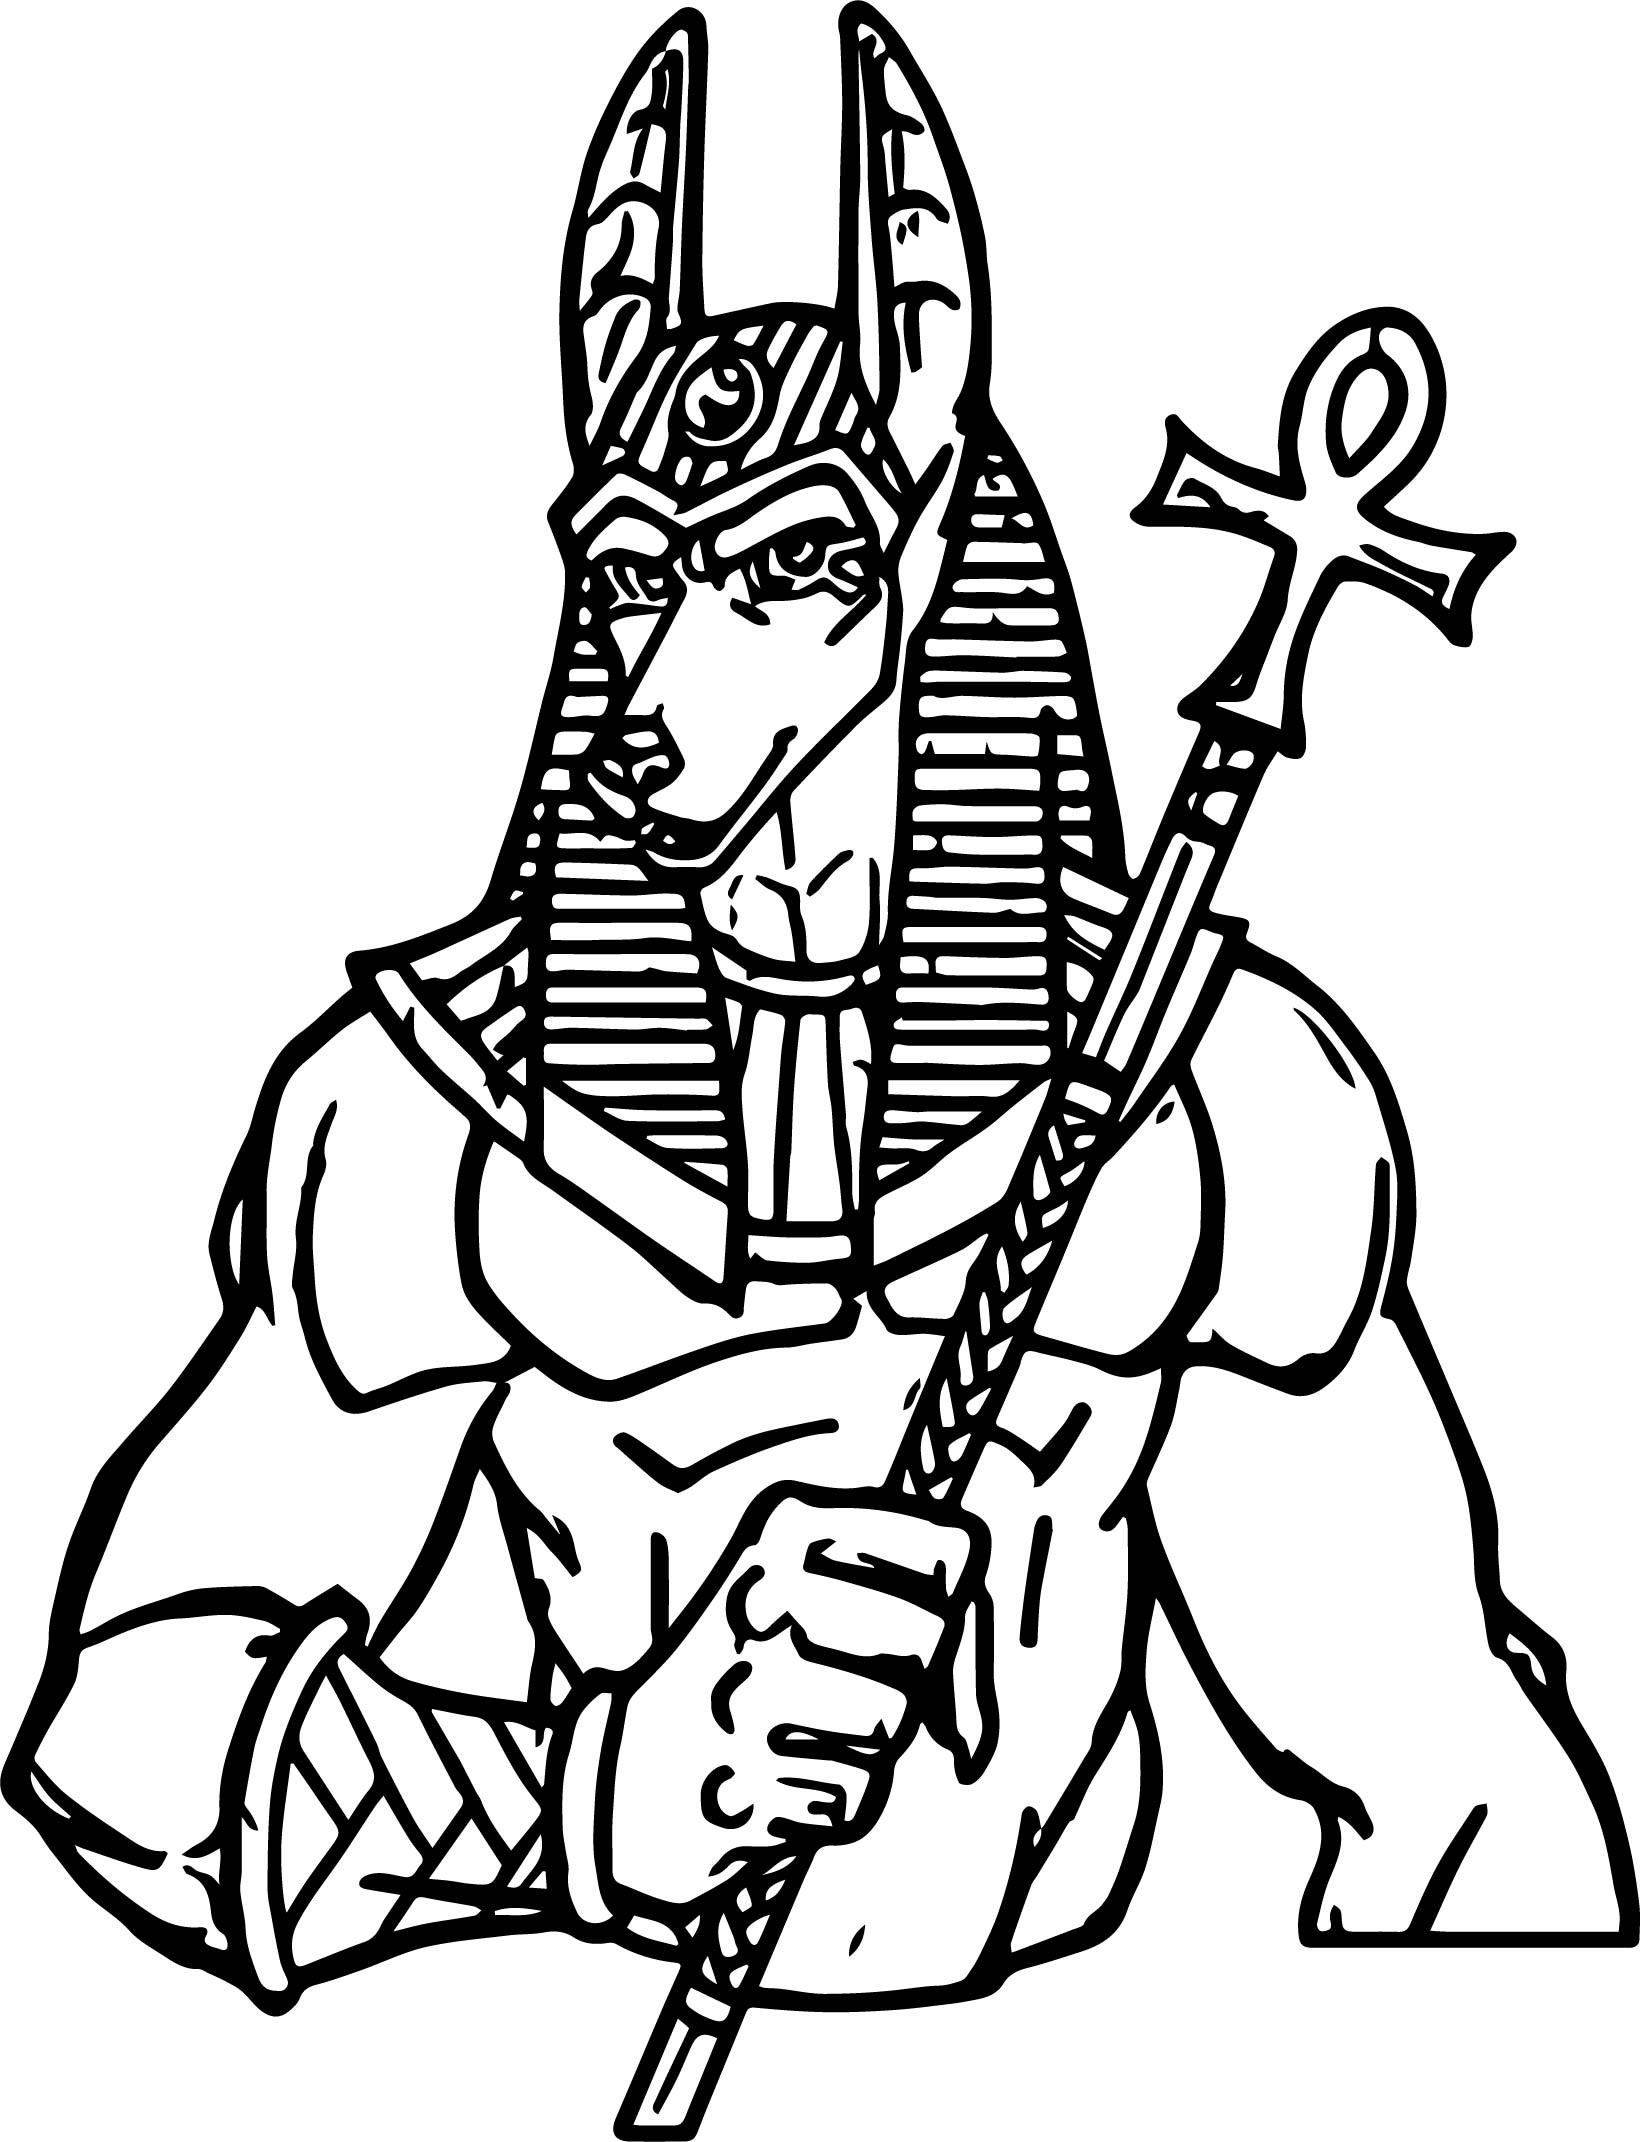 Anubis Coloring Page at GetColorings.com | Free printable colorings